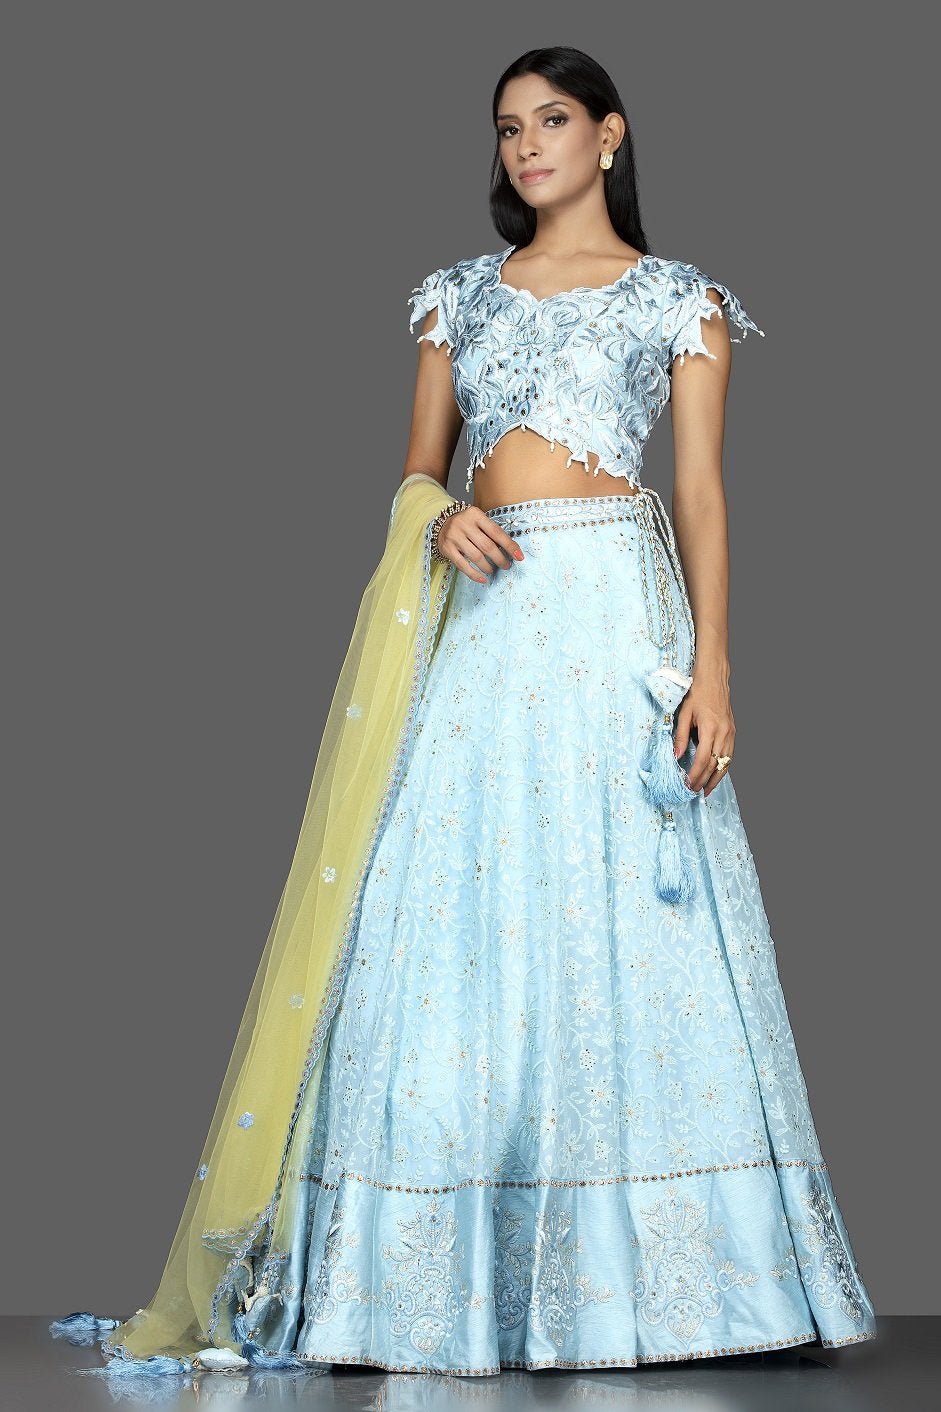 Shop sky blue stone and Lucknowi work georgette lehenga online in USA with green net dupatta. Spread ethnic elegance on weddings and special occasions in splendid designer lehengas, Indowestern dresses crafted with exquisite Indian craftsmanship from Pure Elegance Indian fashion store in USA.-side